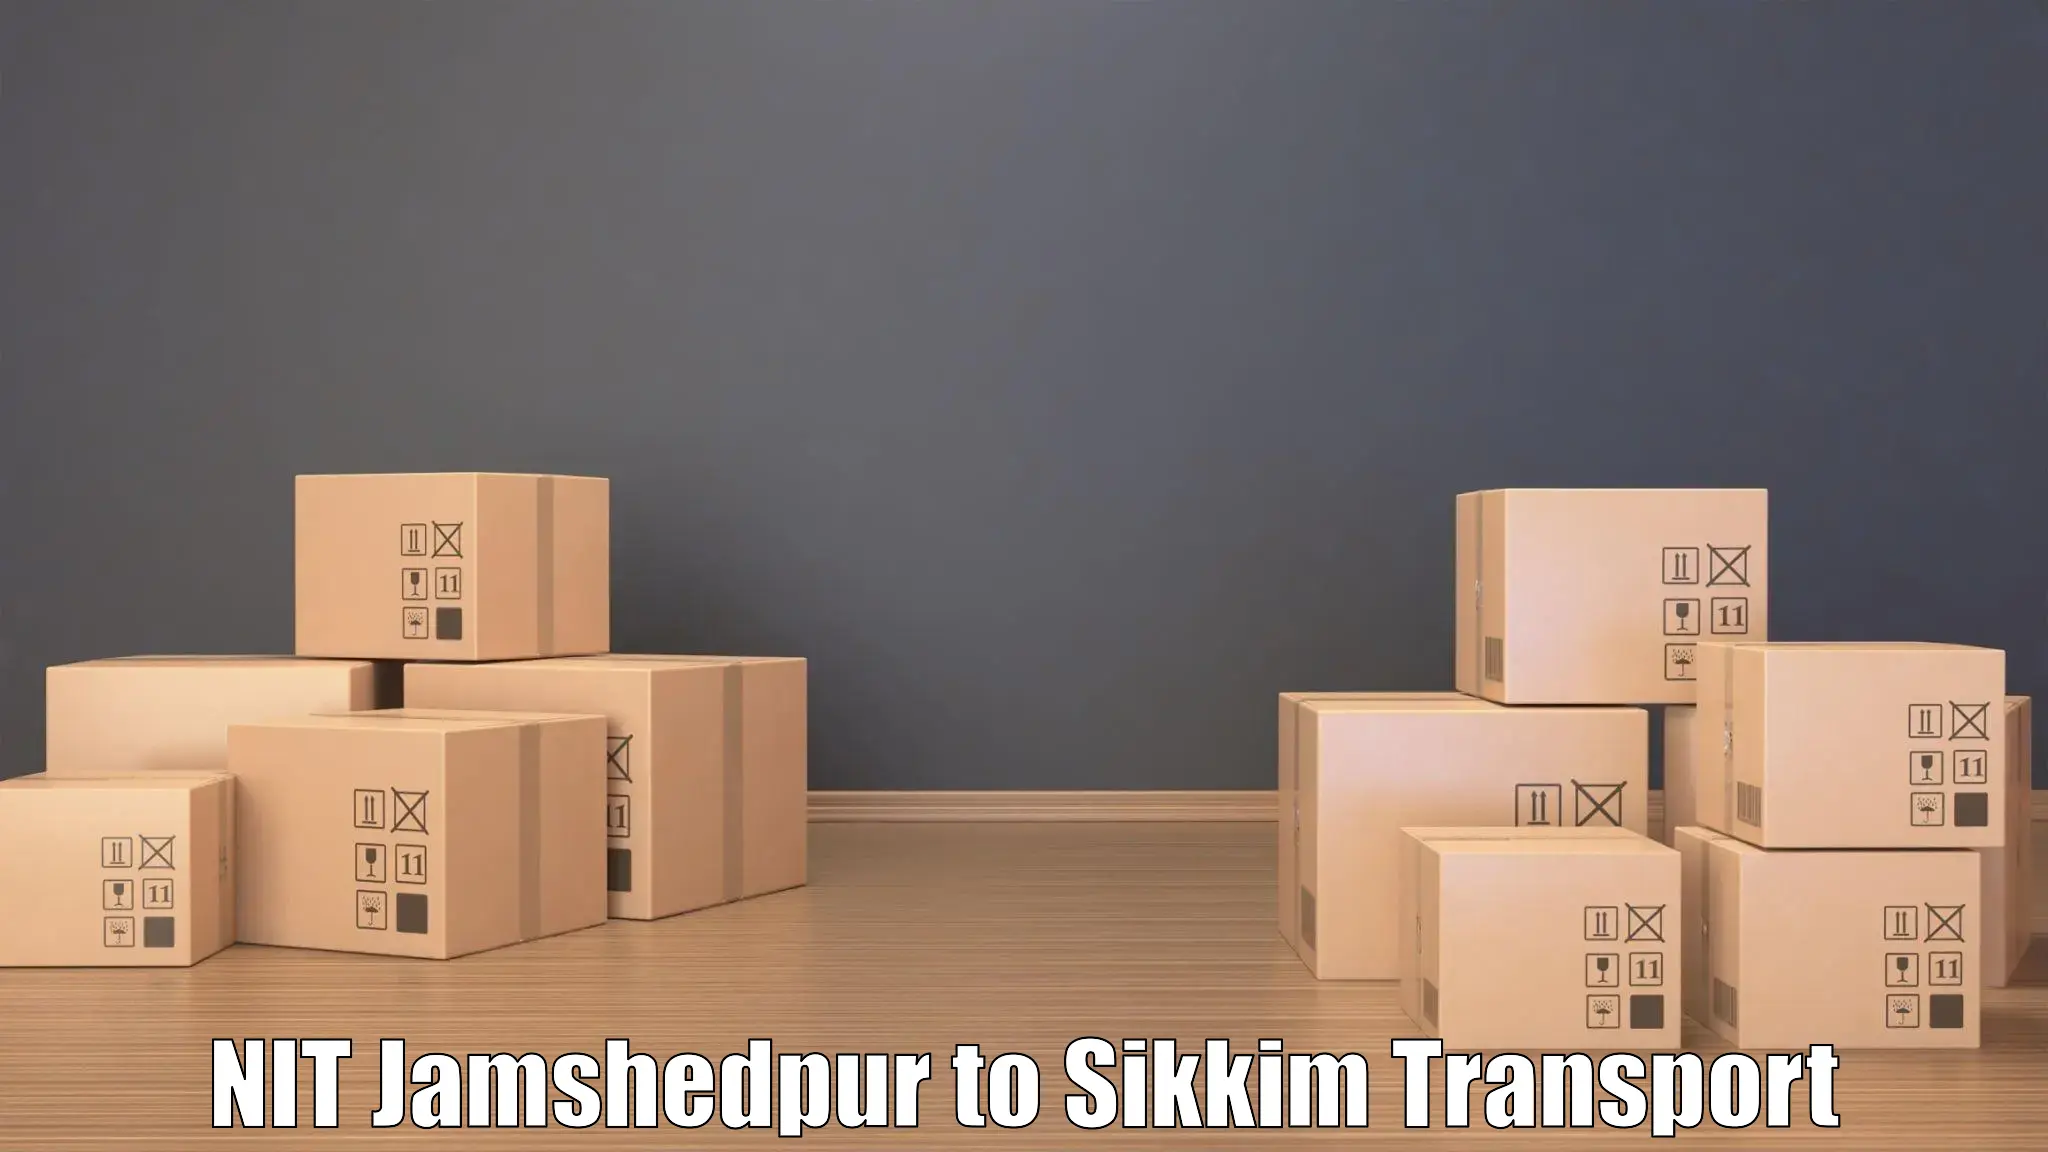 Transport bike from one state to another NIT Jamshedpur to Sikkim